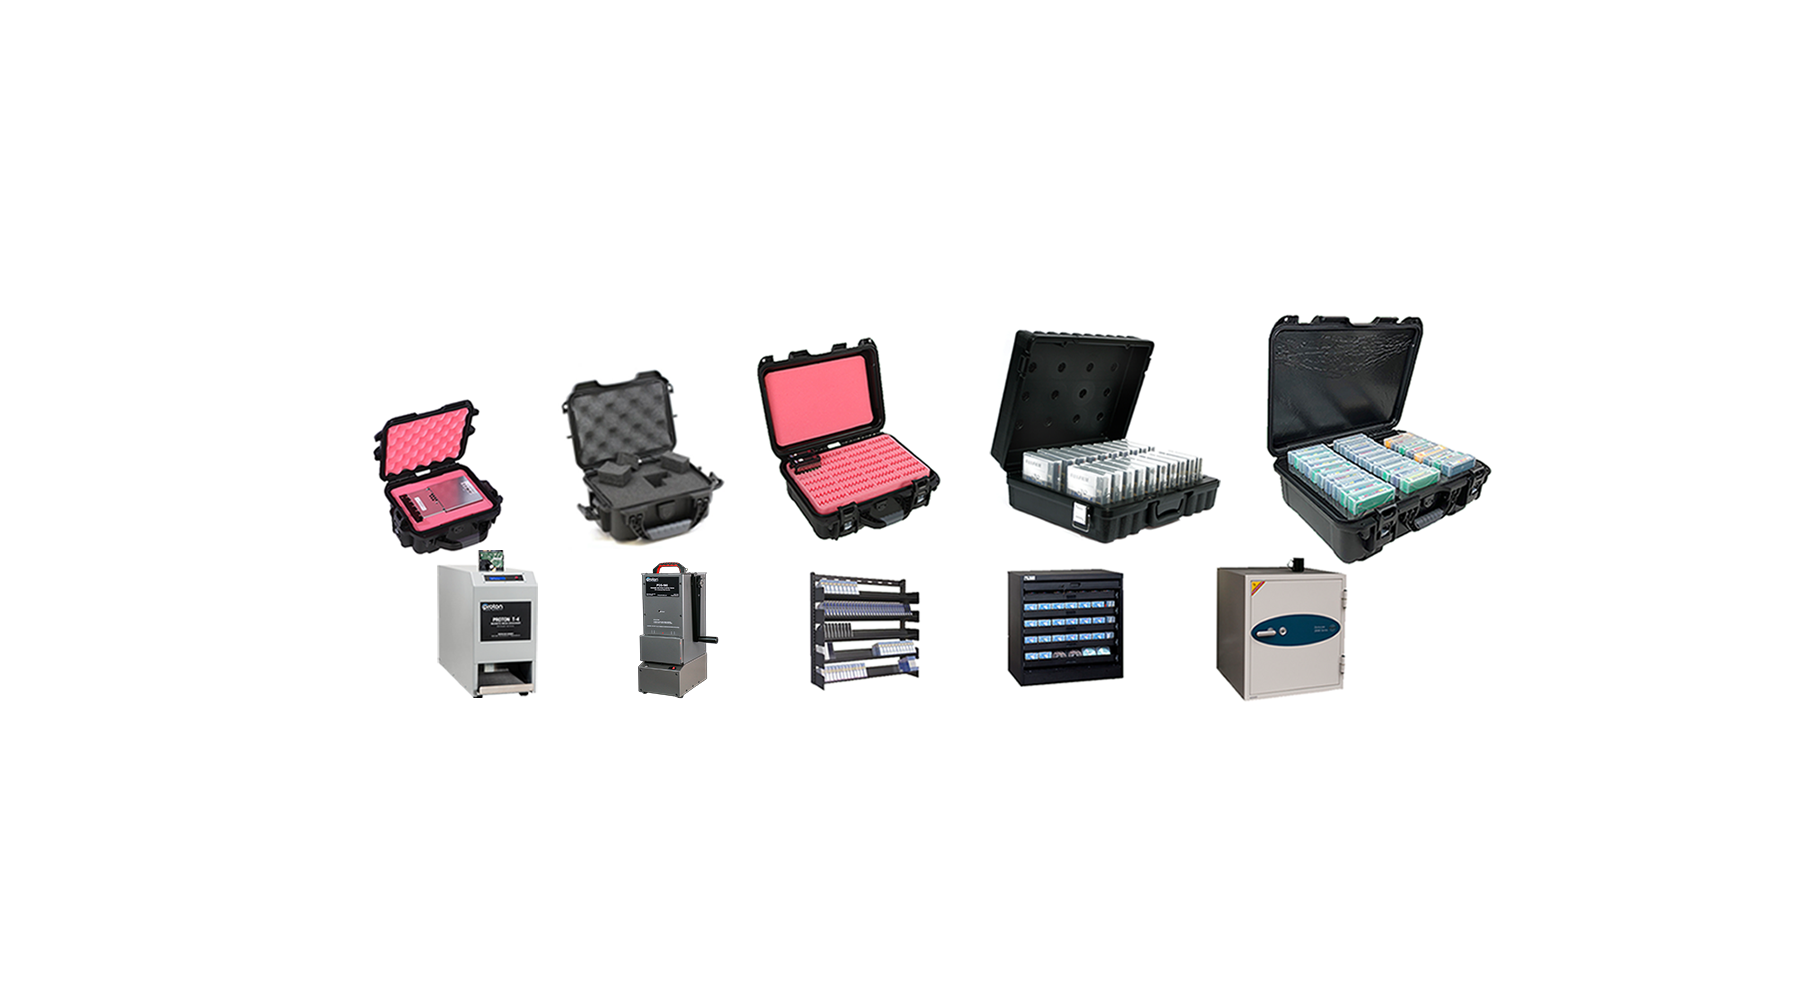 sample of products - protective cases, media racks, fireproof media safes